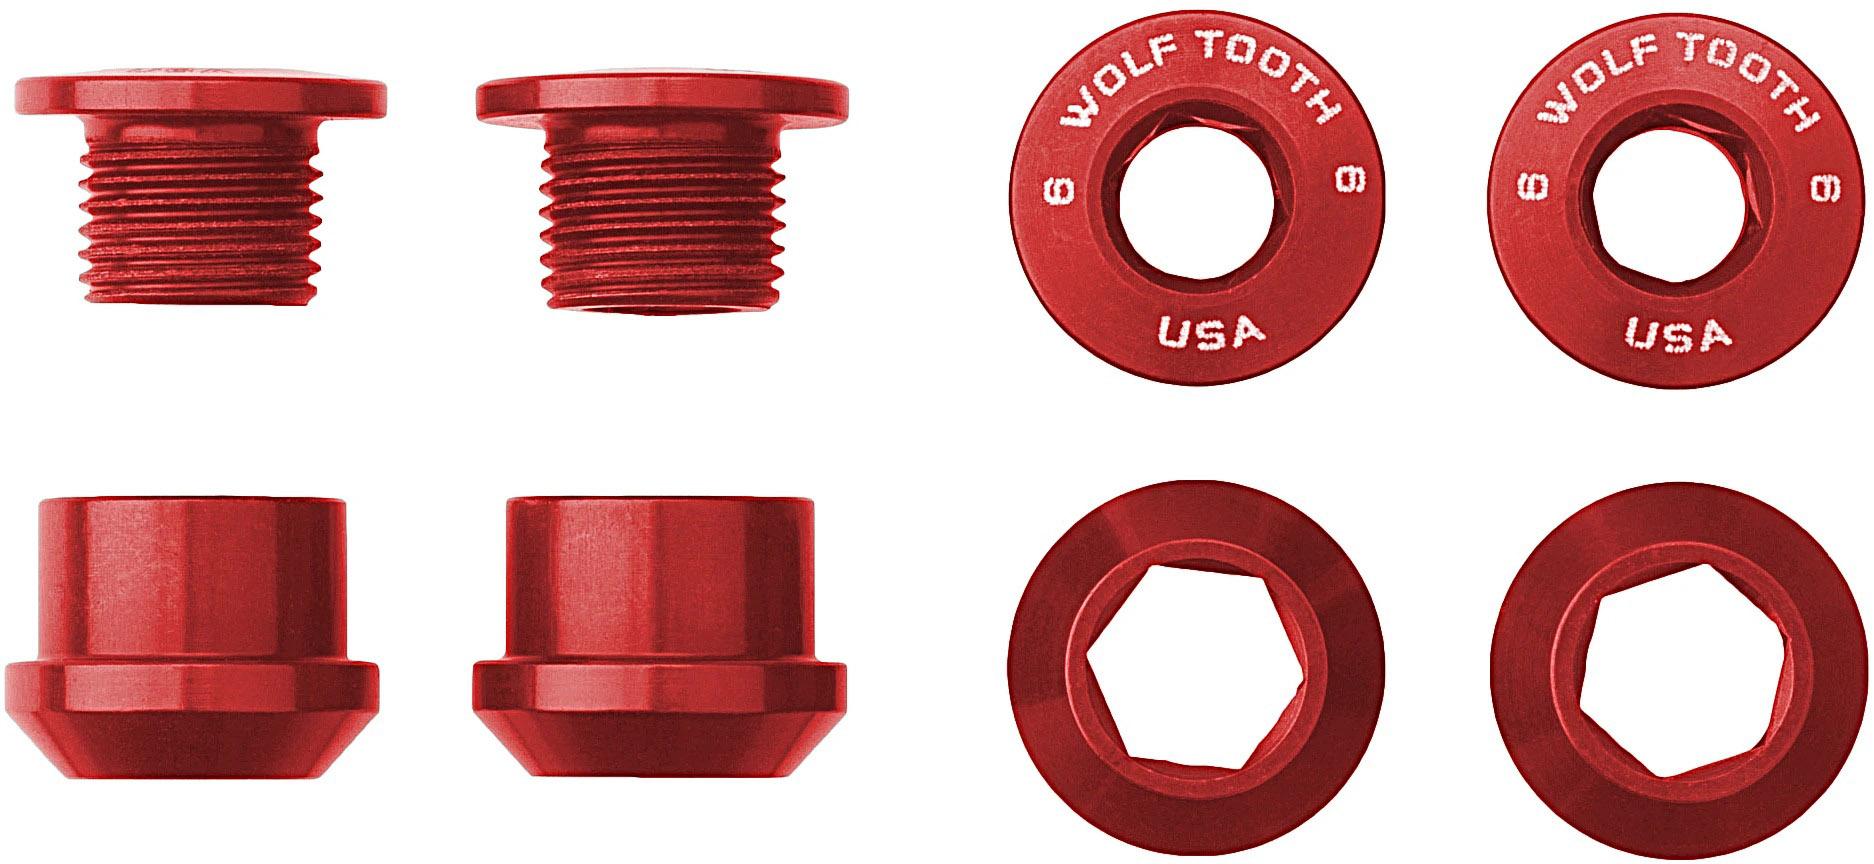 Wolf Tooth 1x Chainring Bolts And Nuts (pack Of 4)  Red